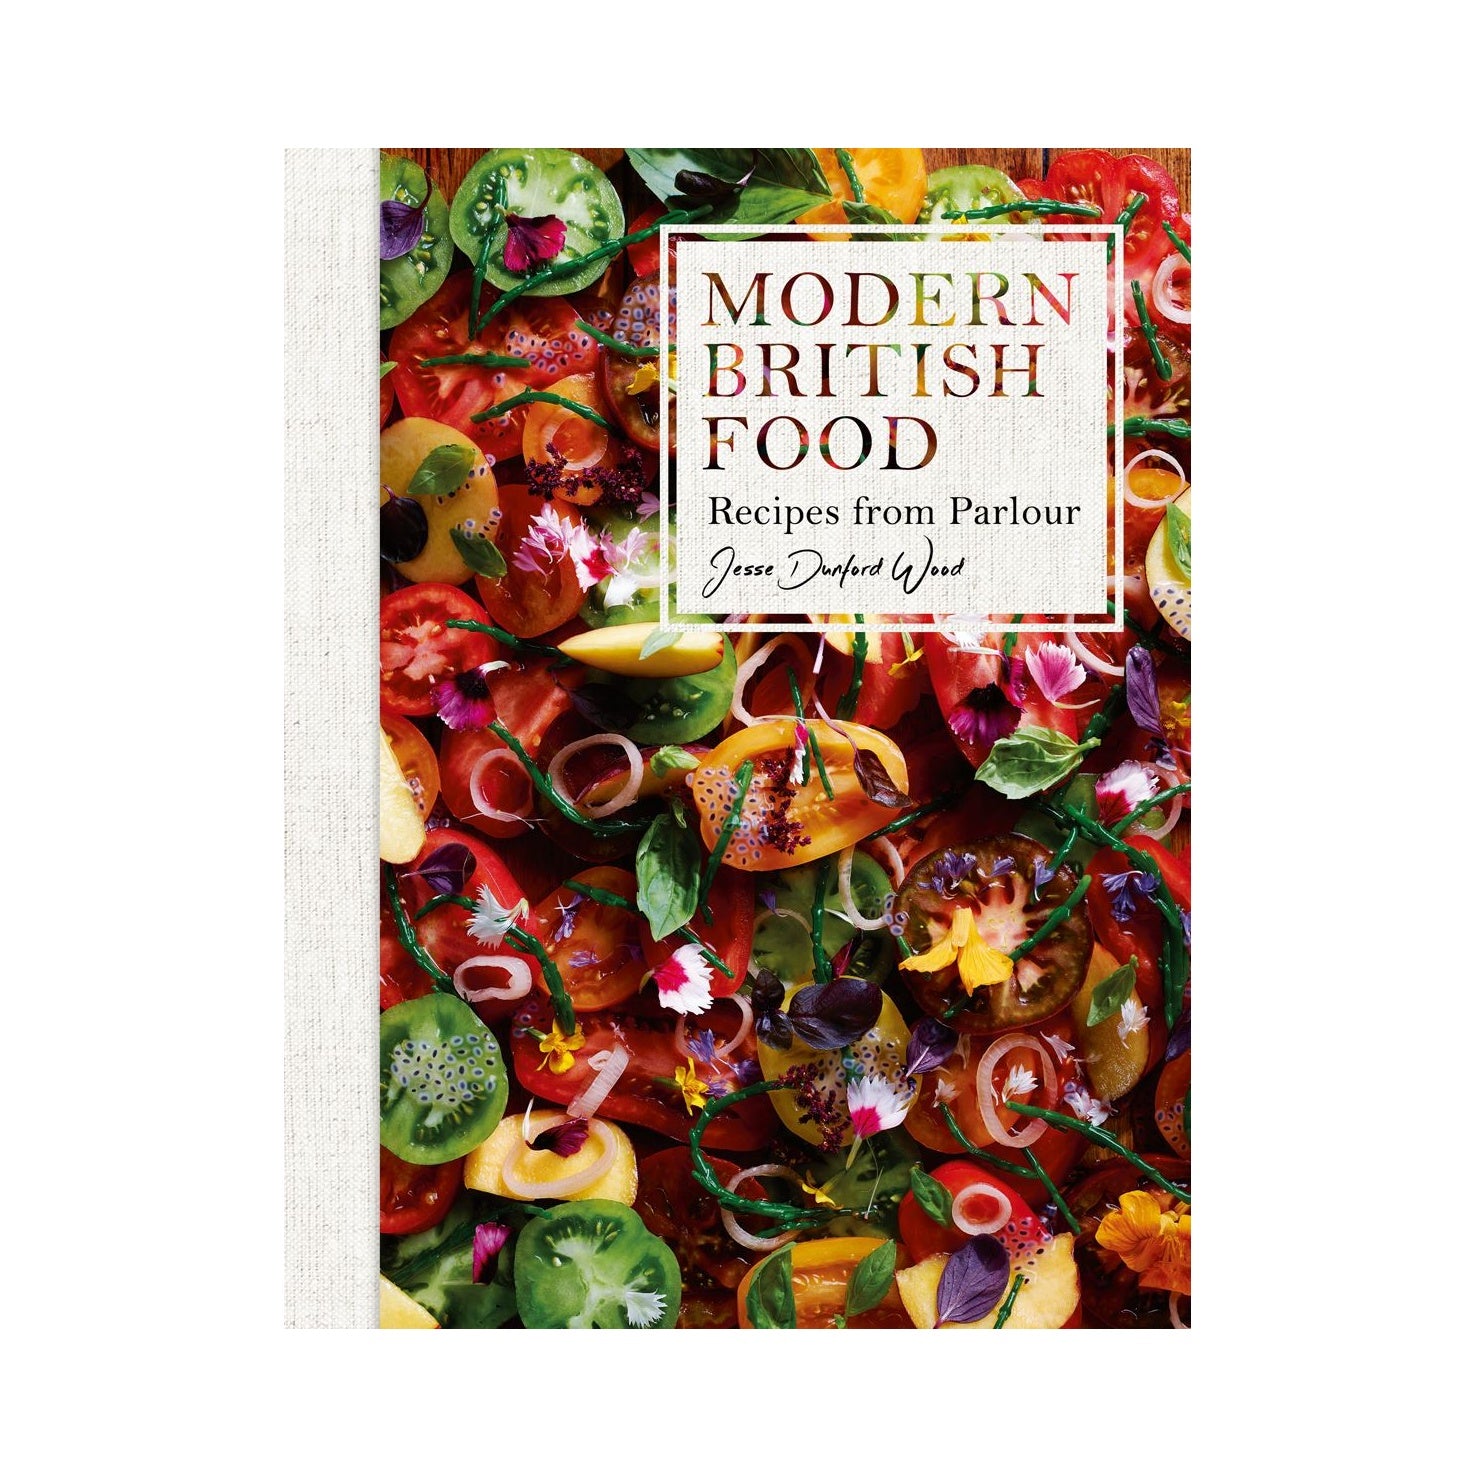 Modern British Food - Recipes From Parlour